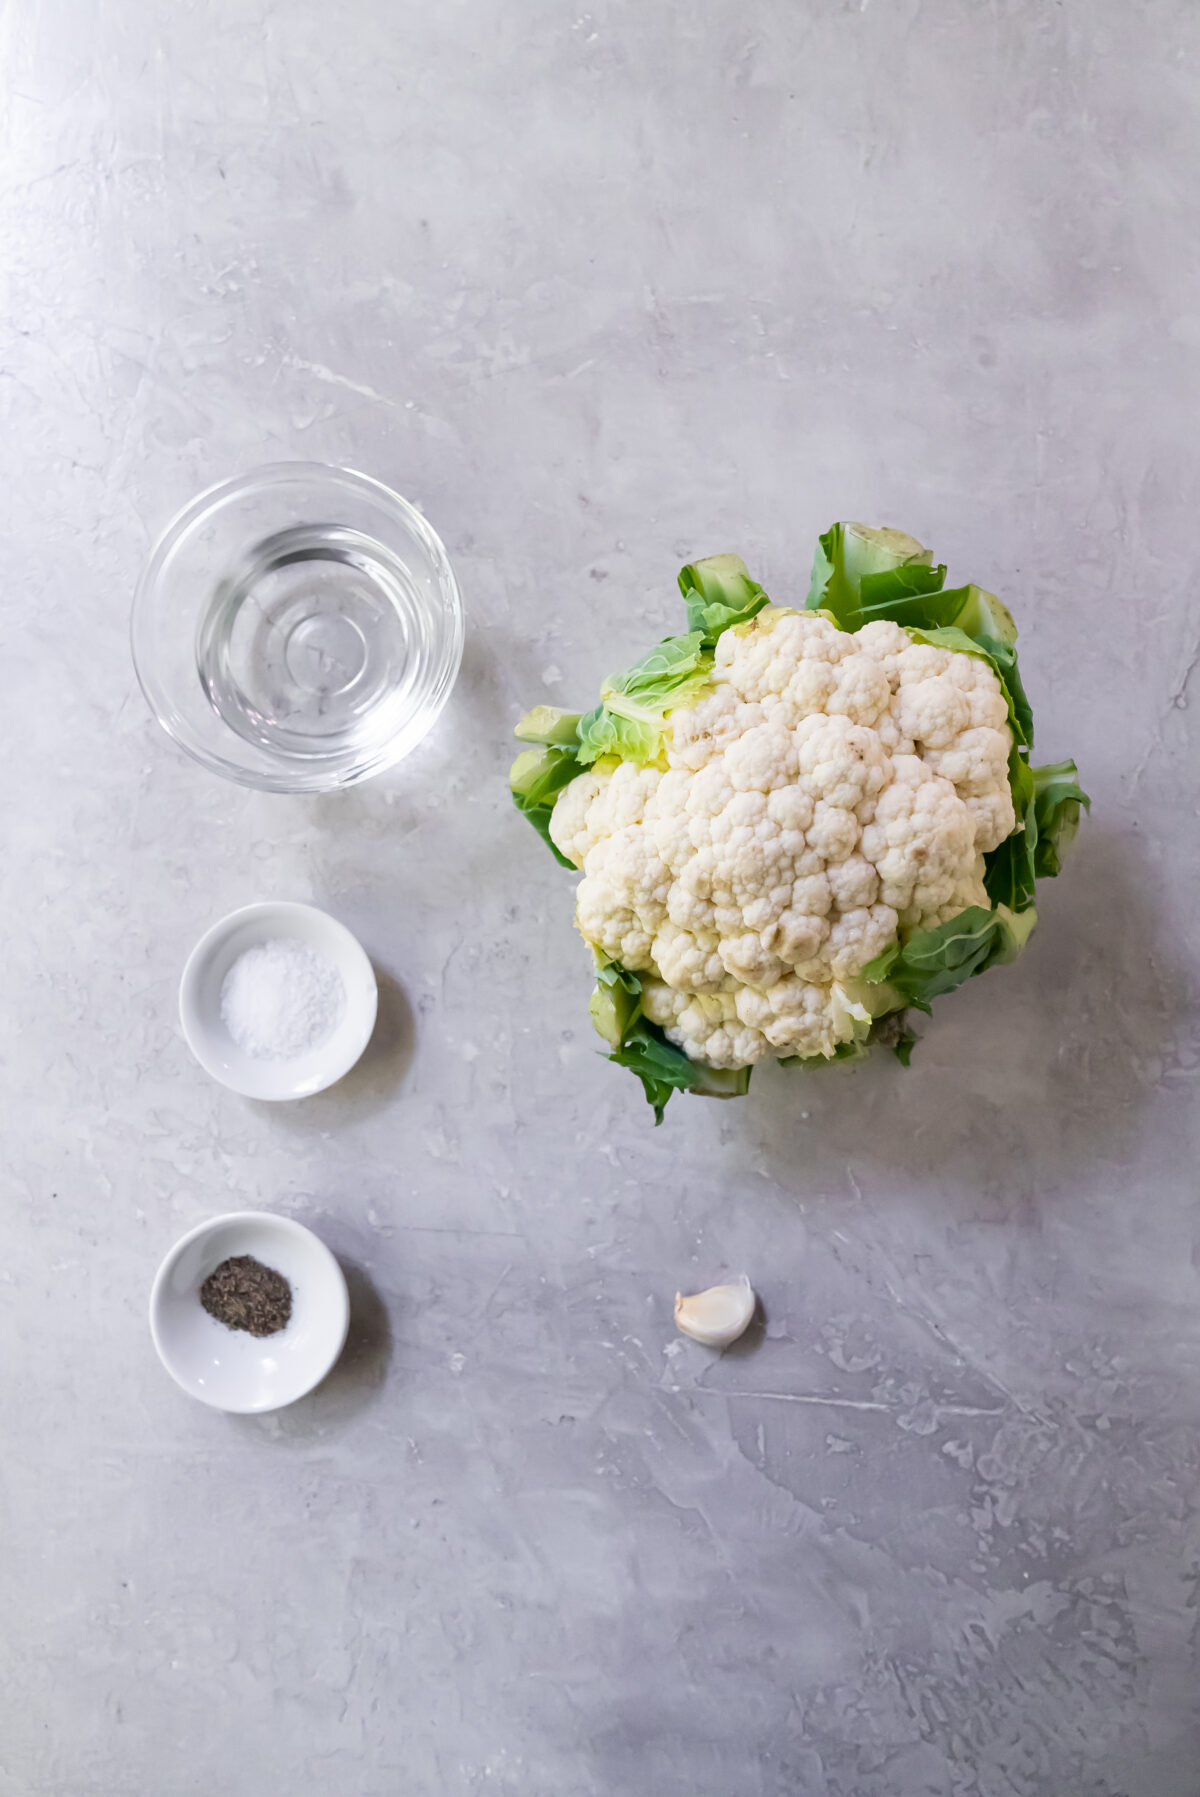 Ingredients consisting of water, salt, pepper, one garlic clove and one head of cauliflower on a white countertop.